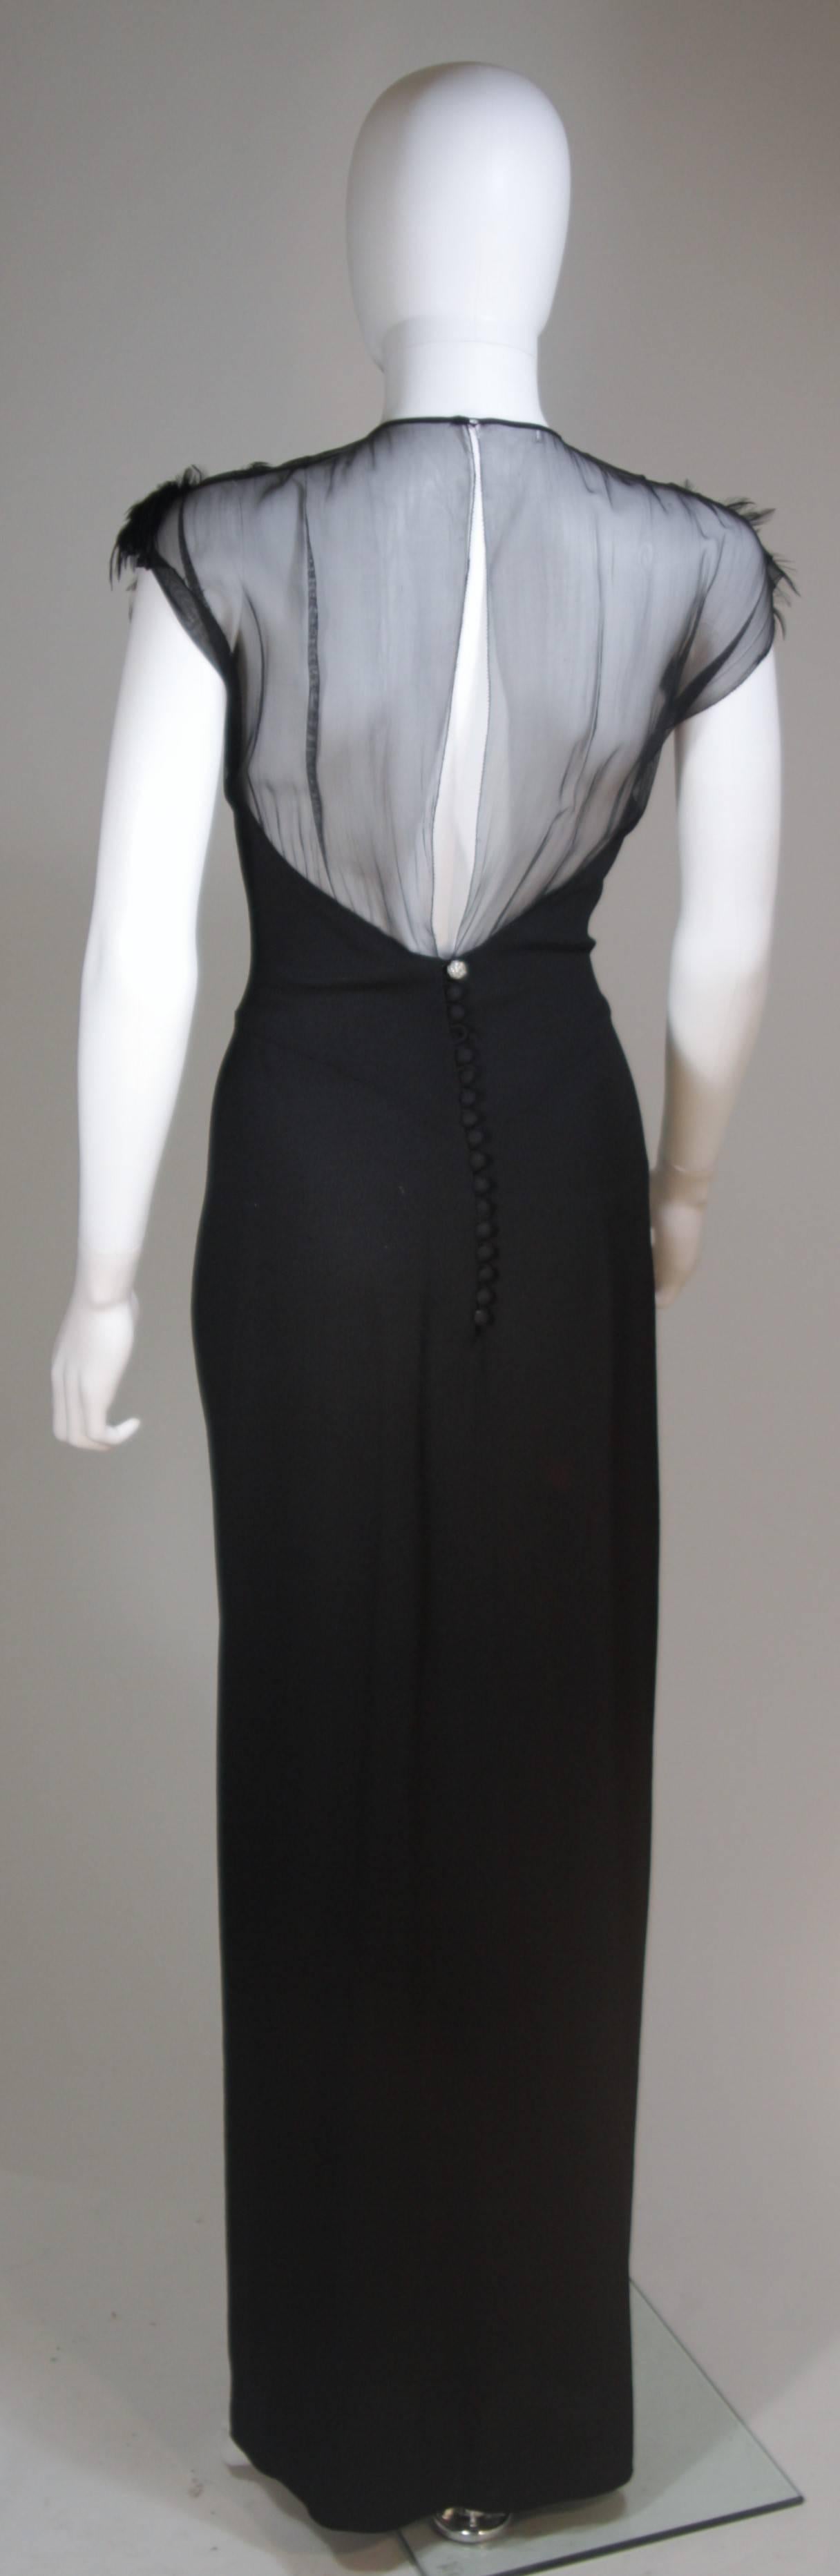 JEAN CAROL 1930's Feather Bust Gown with Drape and Sheer Bodice Size 2 For Sale 3